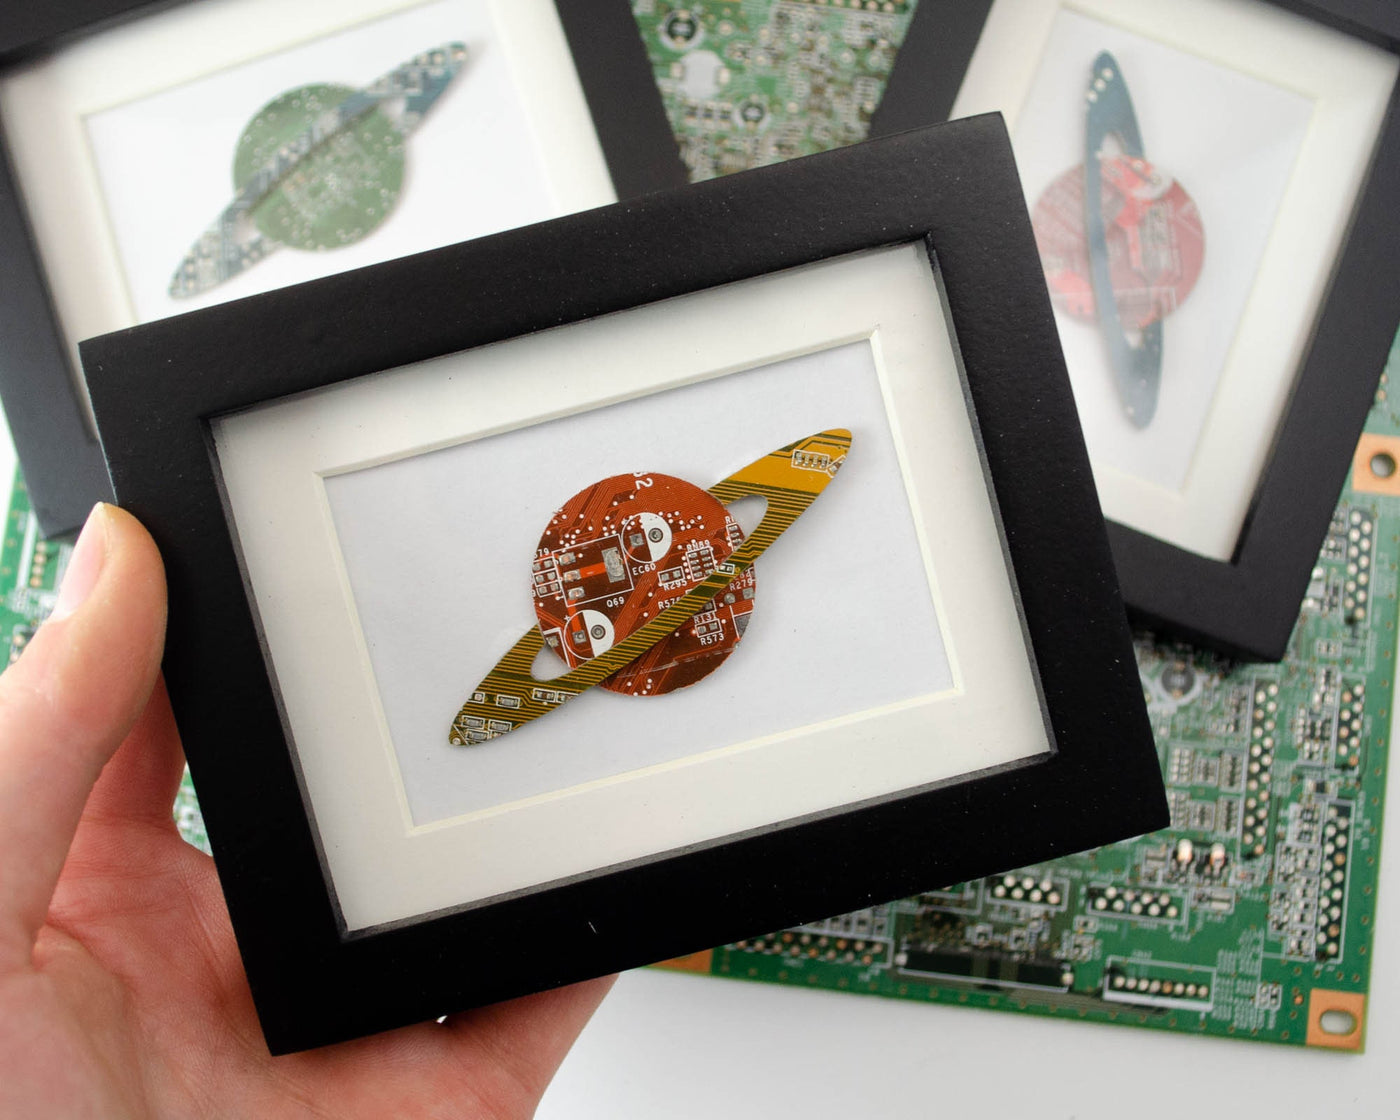 handmade framed art gift made from recycled circuit boards is made into the shape of saturn and you can select the color for the planet and ring